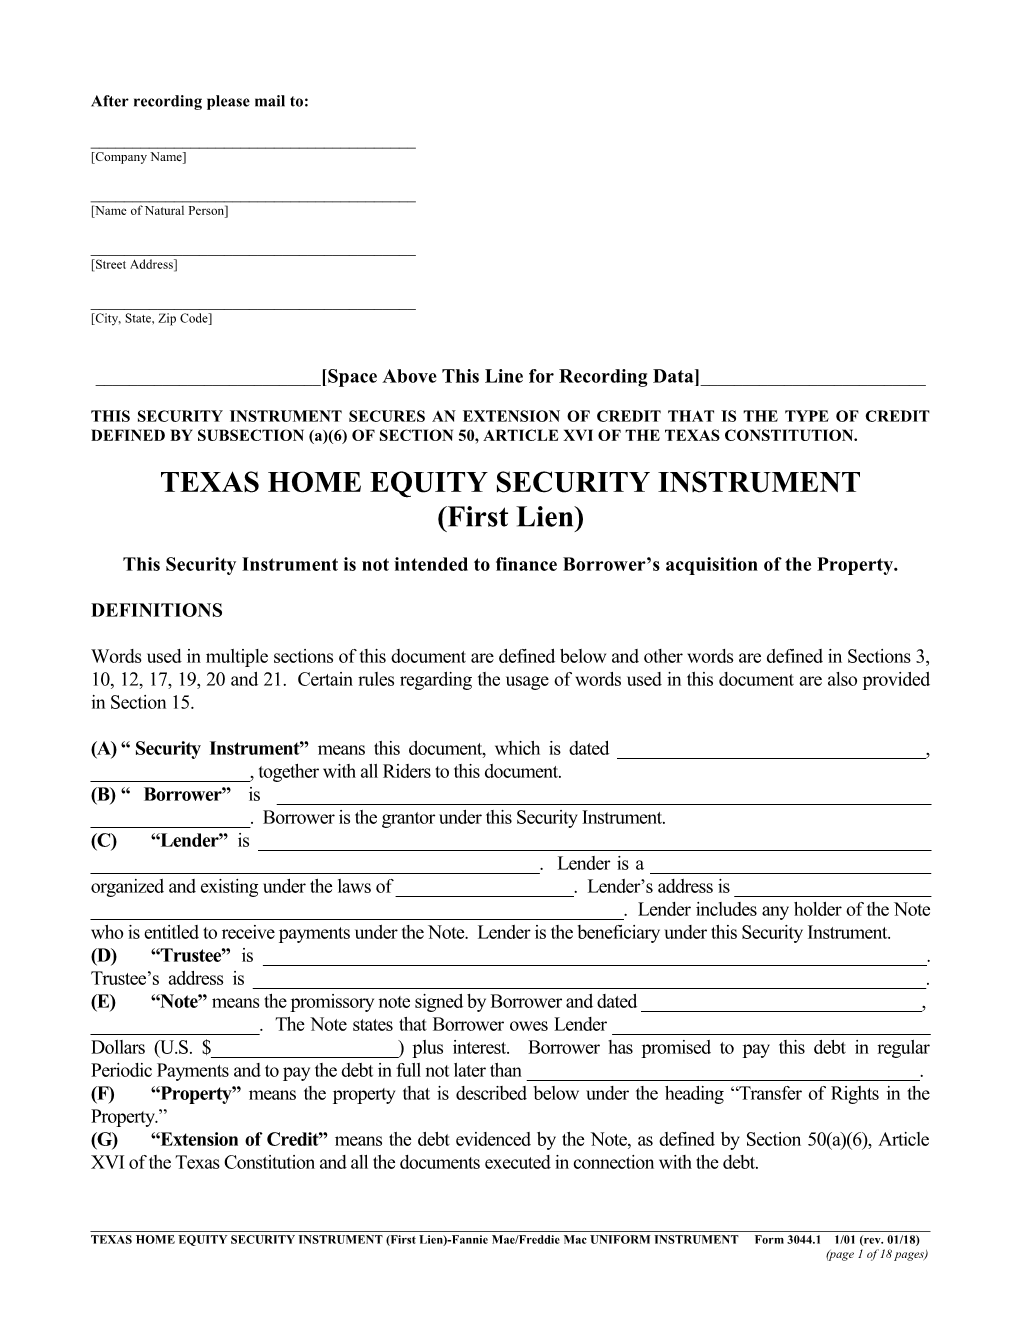 Form 3044.1 - Texas Home Equity Security Instrument First Lien